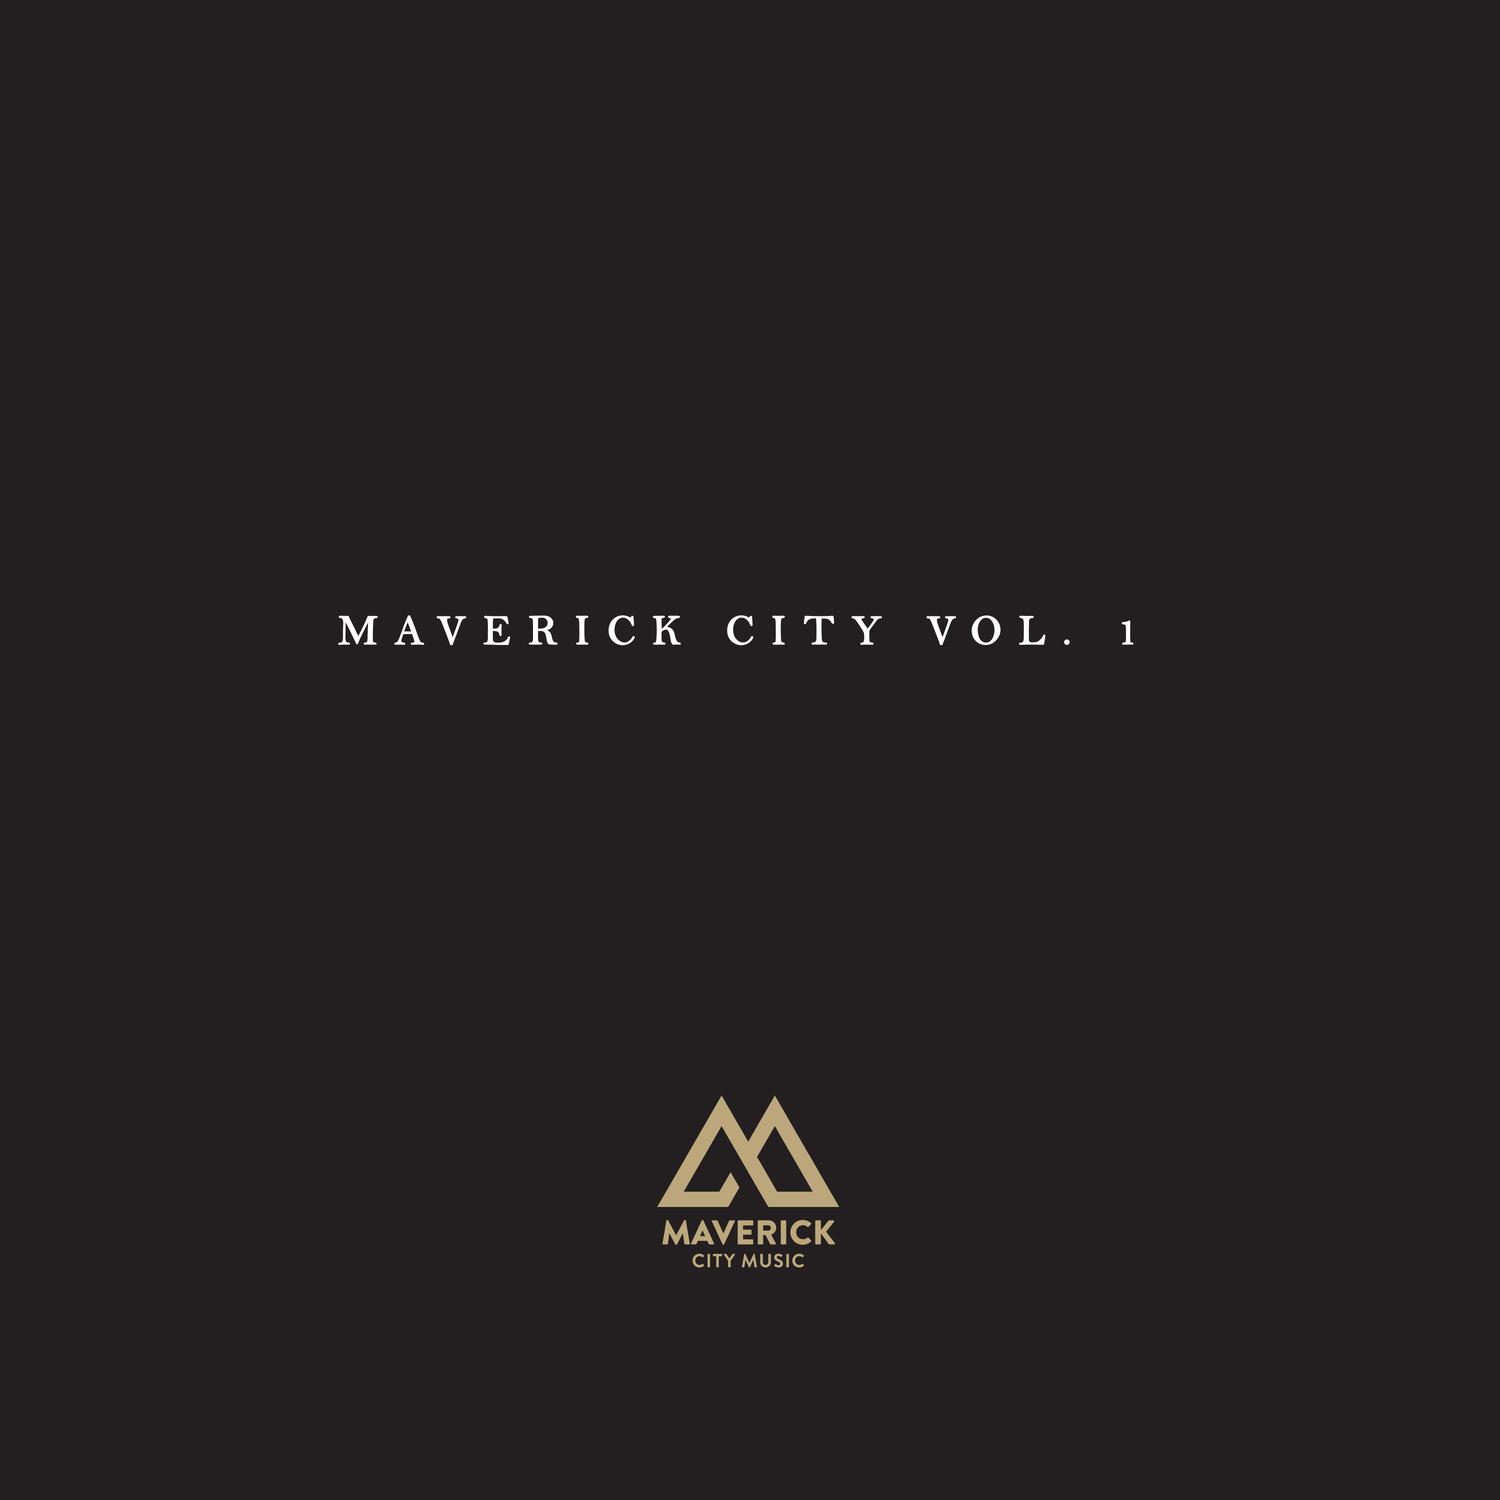 Maverick City Music - You're Welcome in This Place